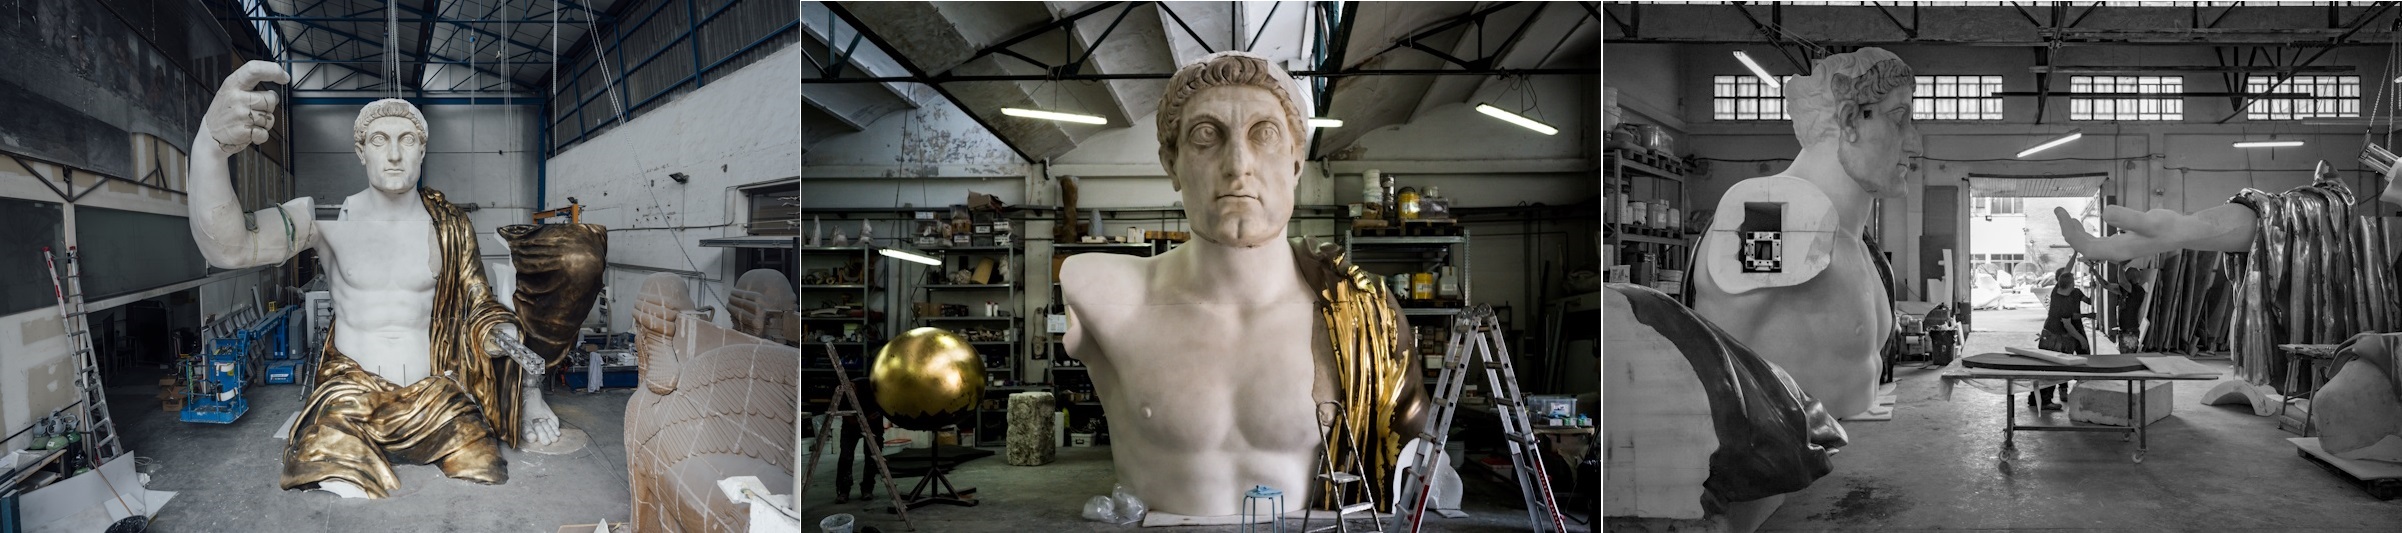 The Colossal Statue of Constantine: FREE Exhibition at the Capitoline Museums 16